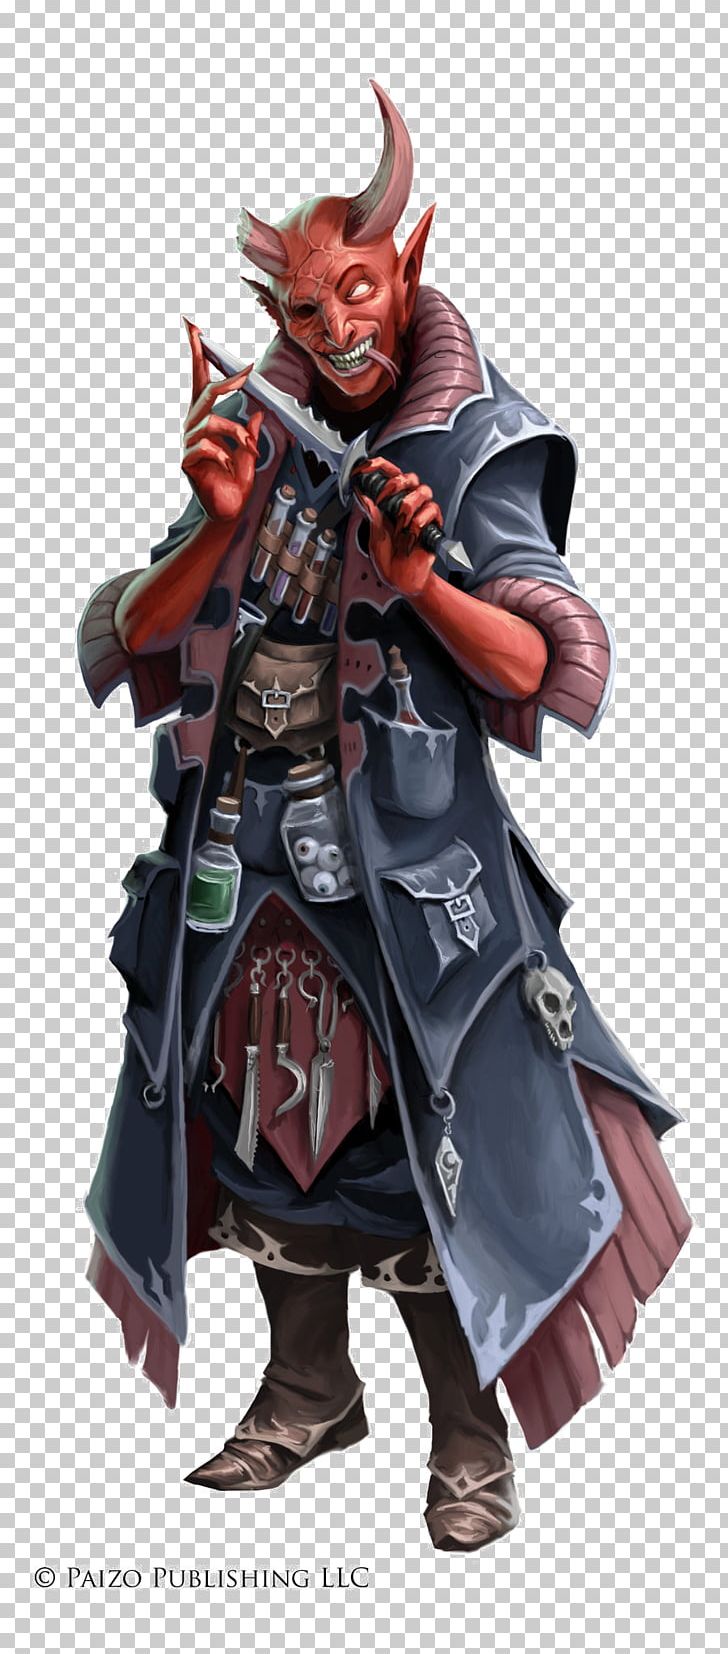 Pathfinder Roleplaying Game D System Dungeons Dragons Tiefling Warlock Png Clipart